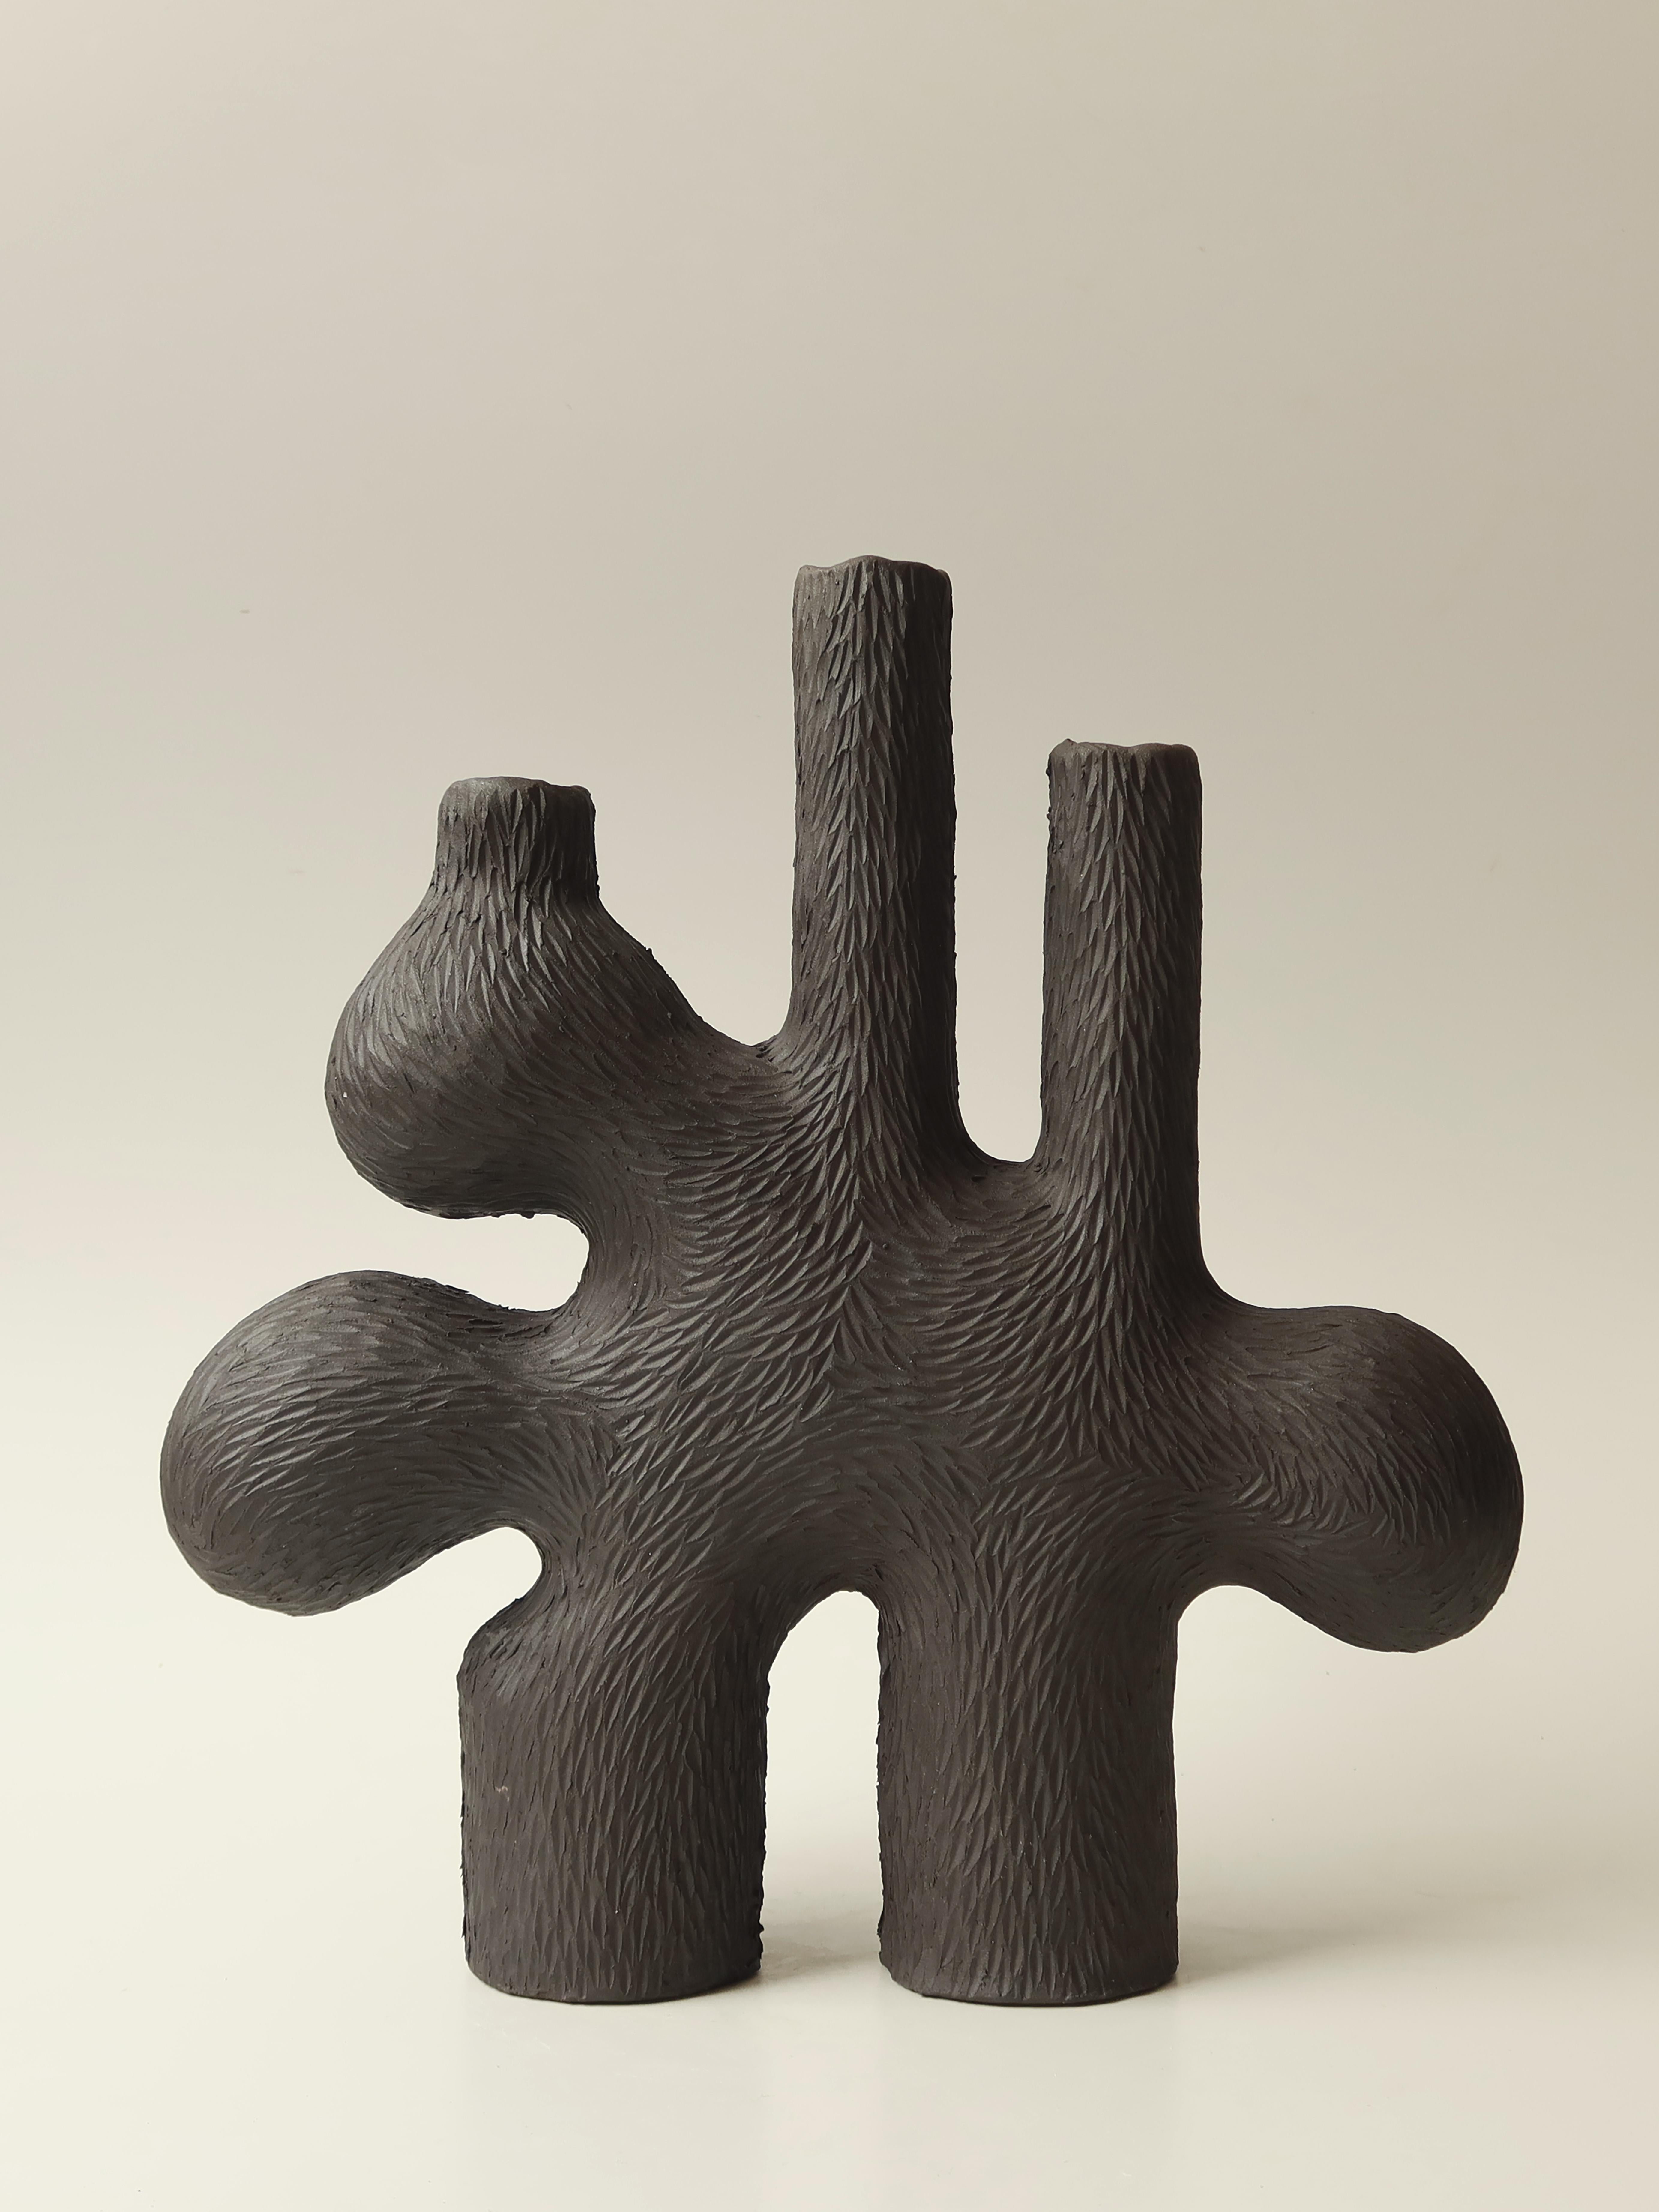 Forest Candelabra no.3 by Jan Ernst
Dimensions: W 40 x D 10 x H 42 cm
Materials: White stoneware, Black clay, Terracotta

Glazed to client specification.


Jan Ernst’s work takes on an experimental approach, as he prefers making bespoke